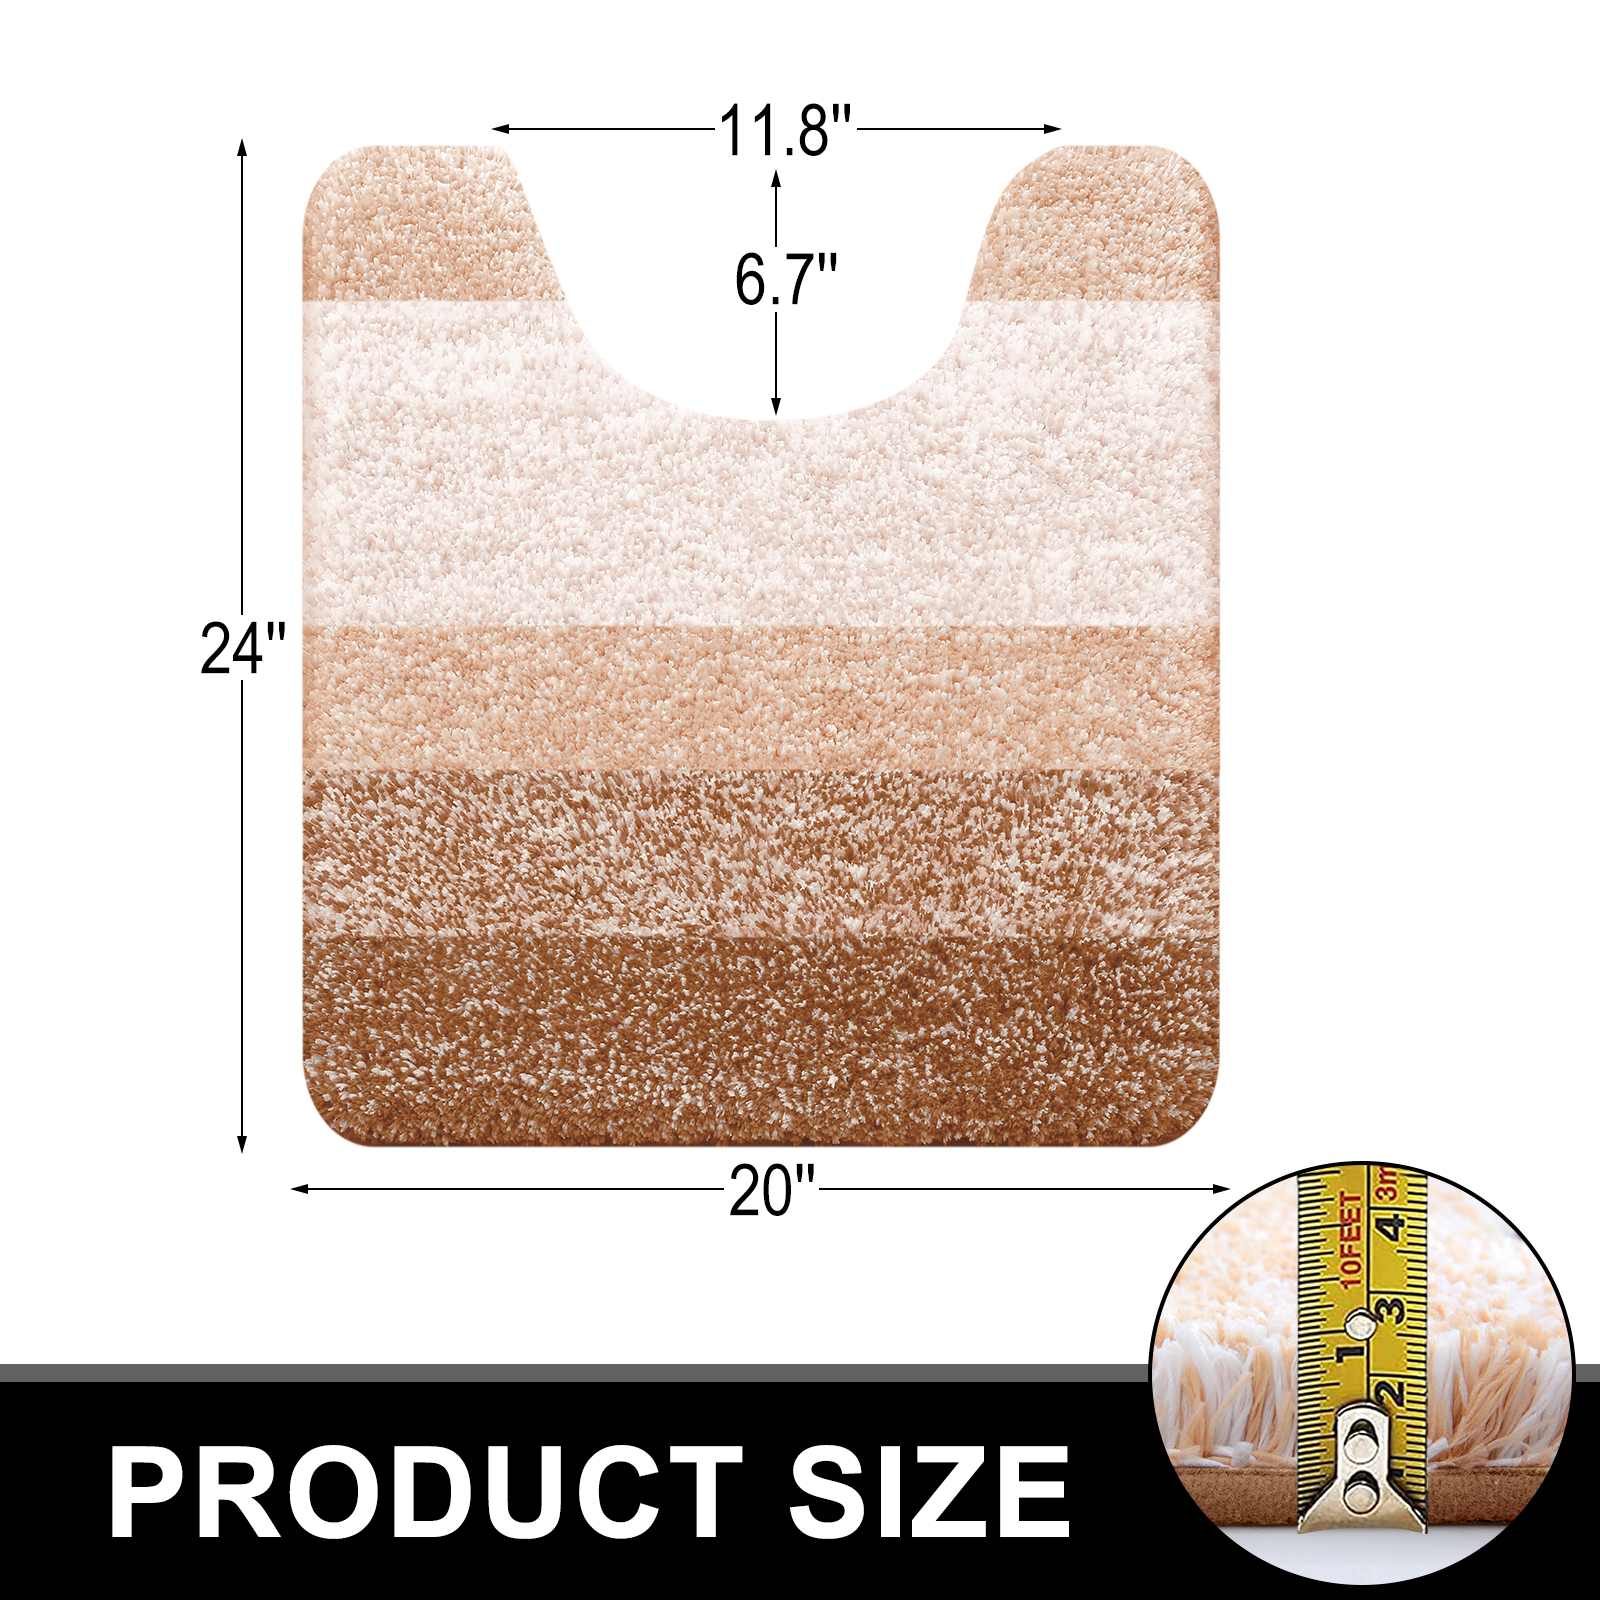 Buganda Luxury U-Shaped Bathroom Rugs, Super Soft and Absorbent Microfiber Toilet Bath Mats, Non-Slip Contour Bathroom Carpets with Rubber Backing, 20X24, Beige - image 2 of 7